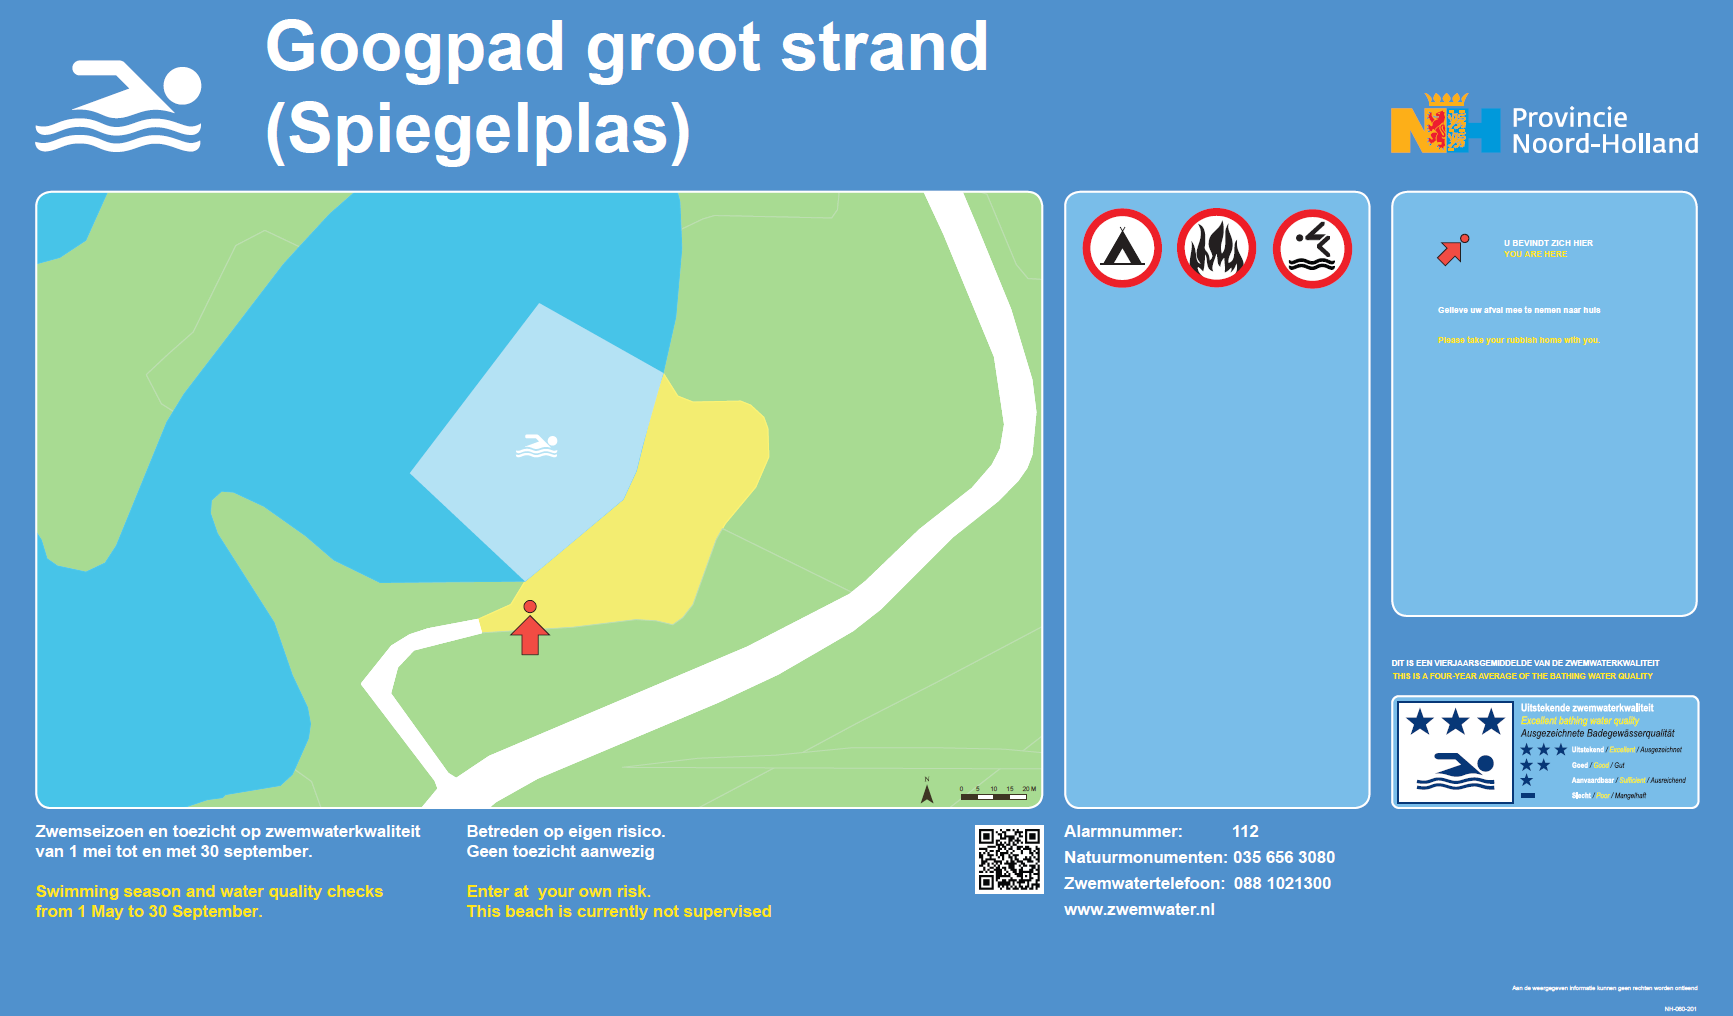 The information board at the swimming location Googpad Grootstrand (Spiegelplas)